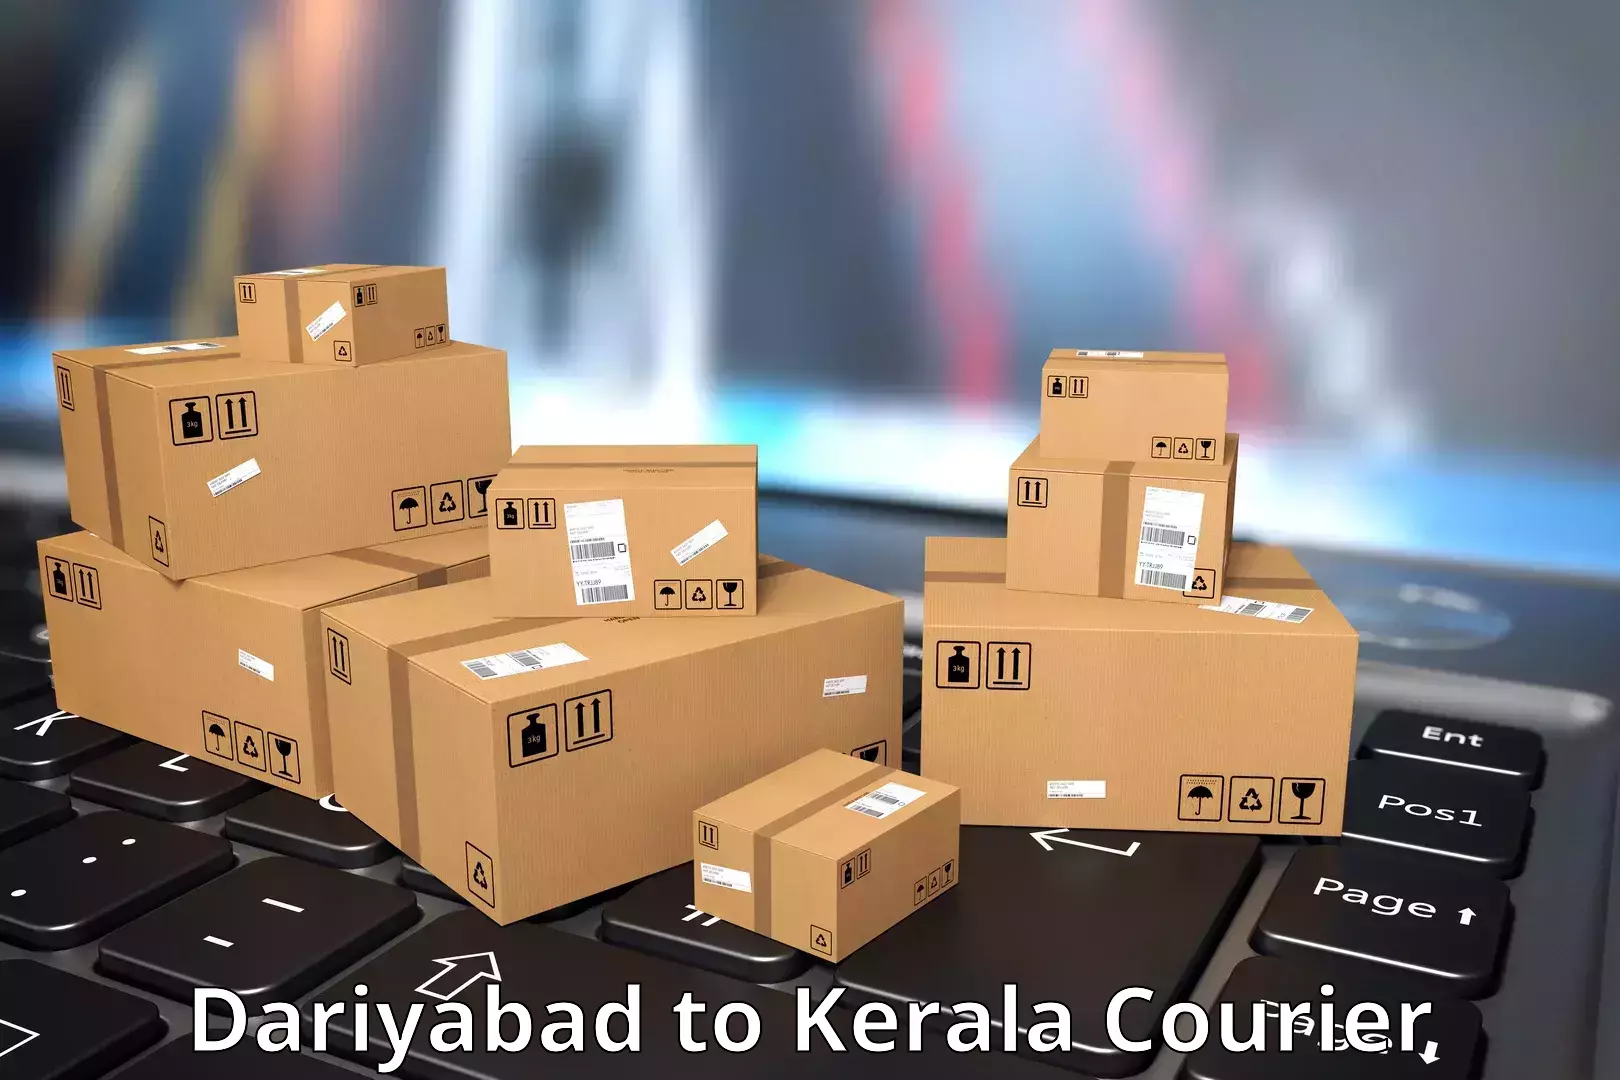 Automated parcel services Dariyabad to Trivandrum